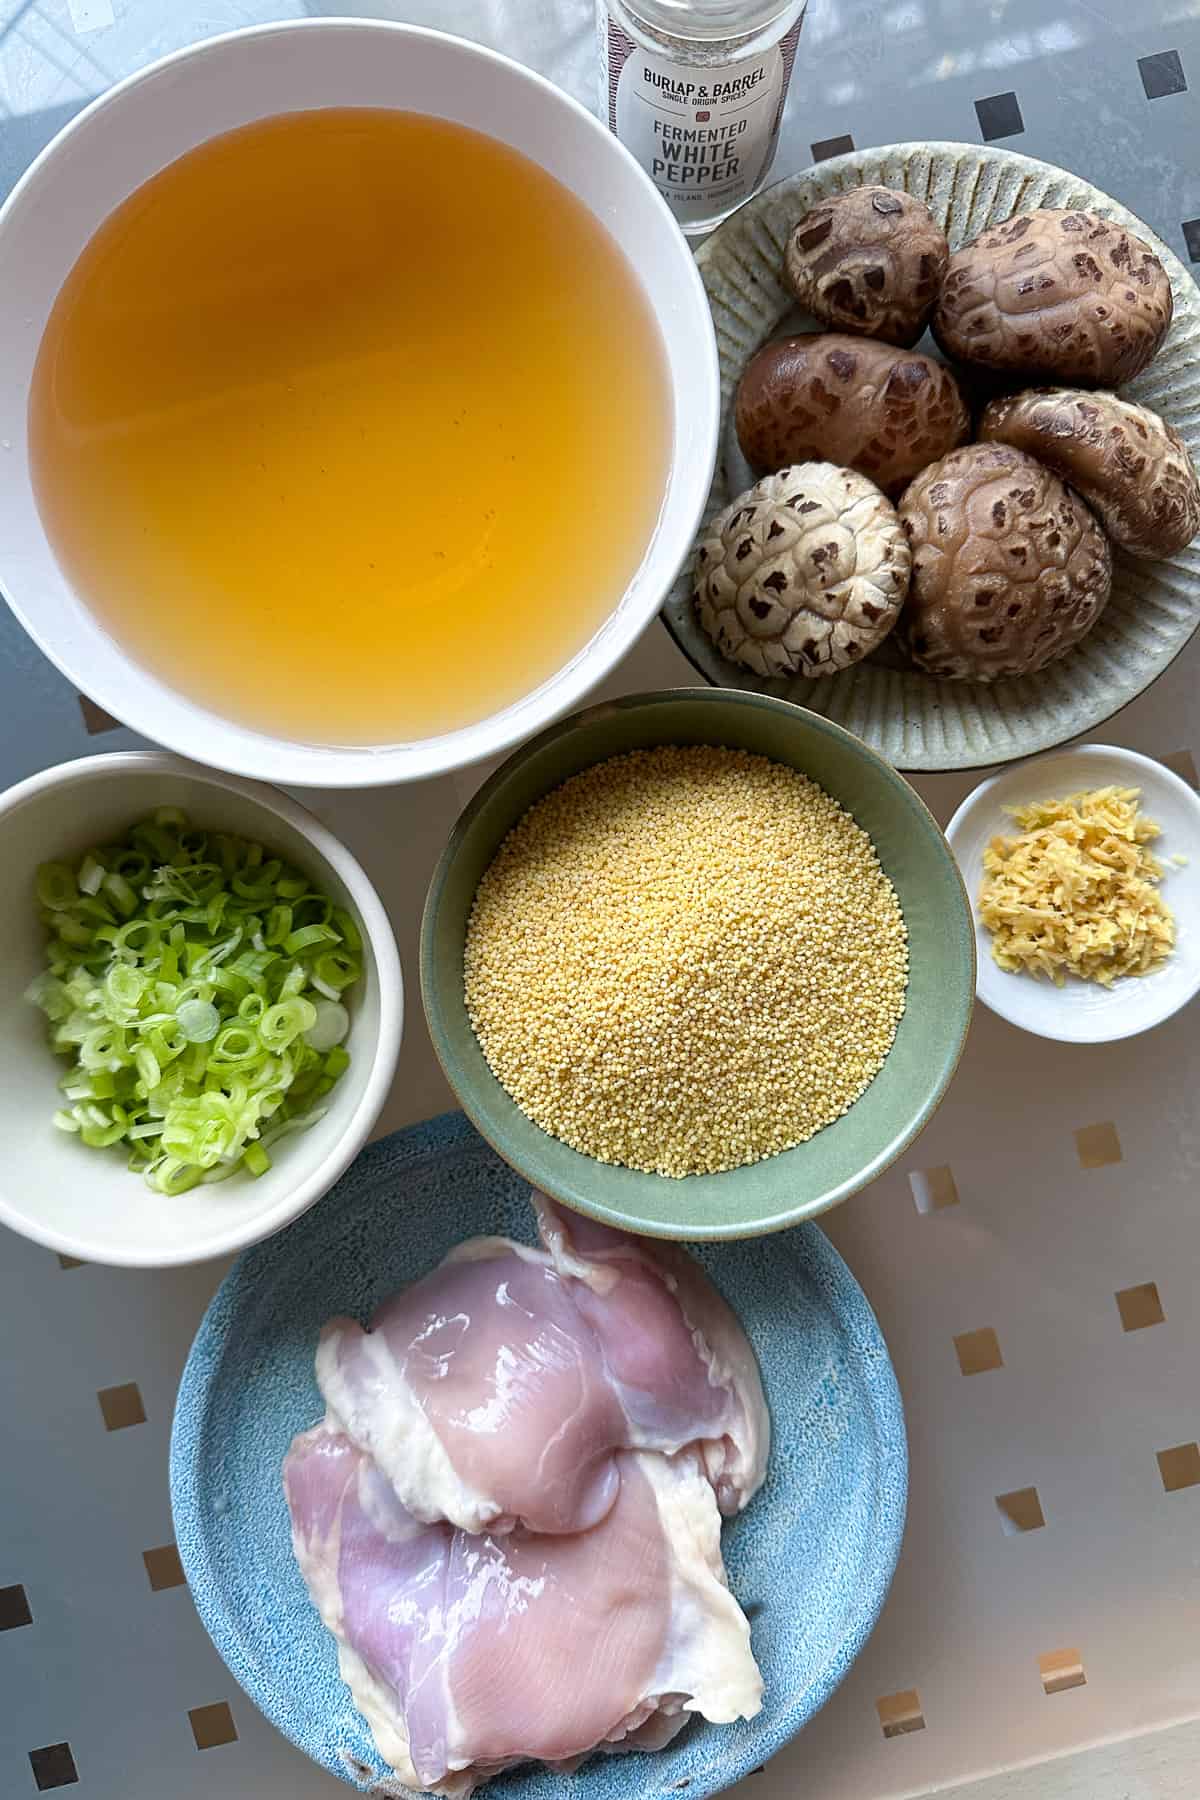 Ingredients for millet porridge with chicken and mushrooms laid out on a table (millet, chicken, mushrooms, mushroom soaking water, green onions, ginger, and white pepper).